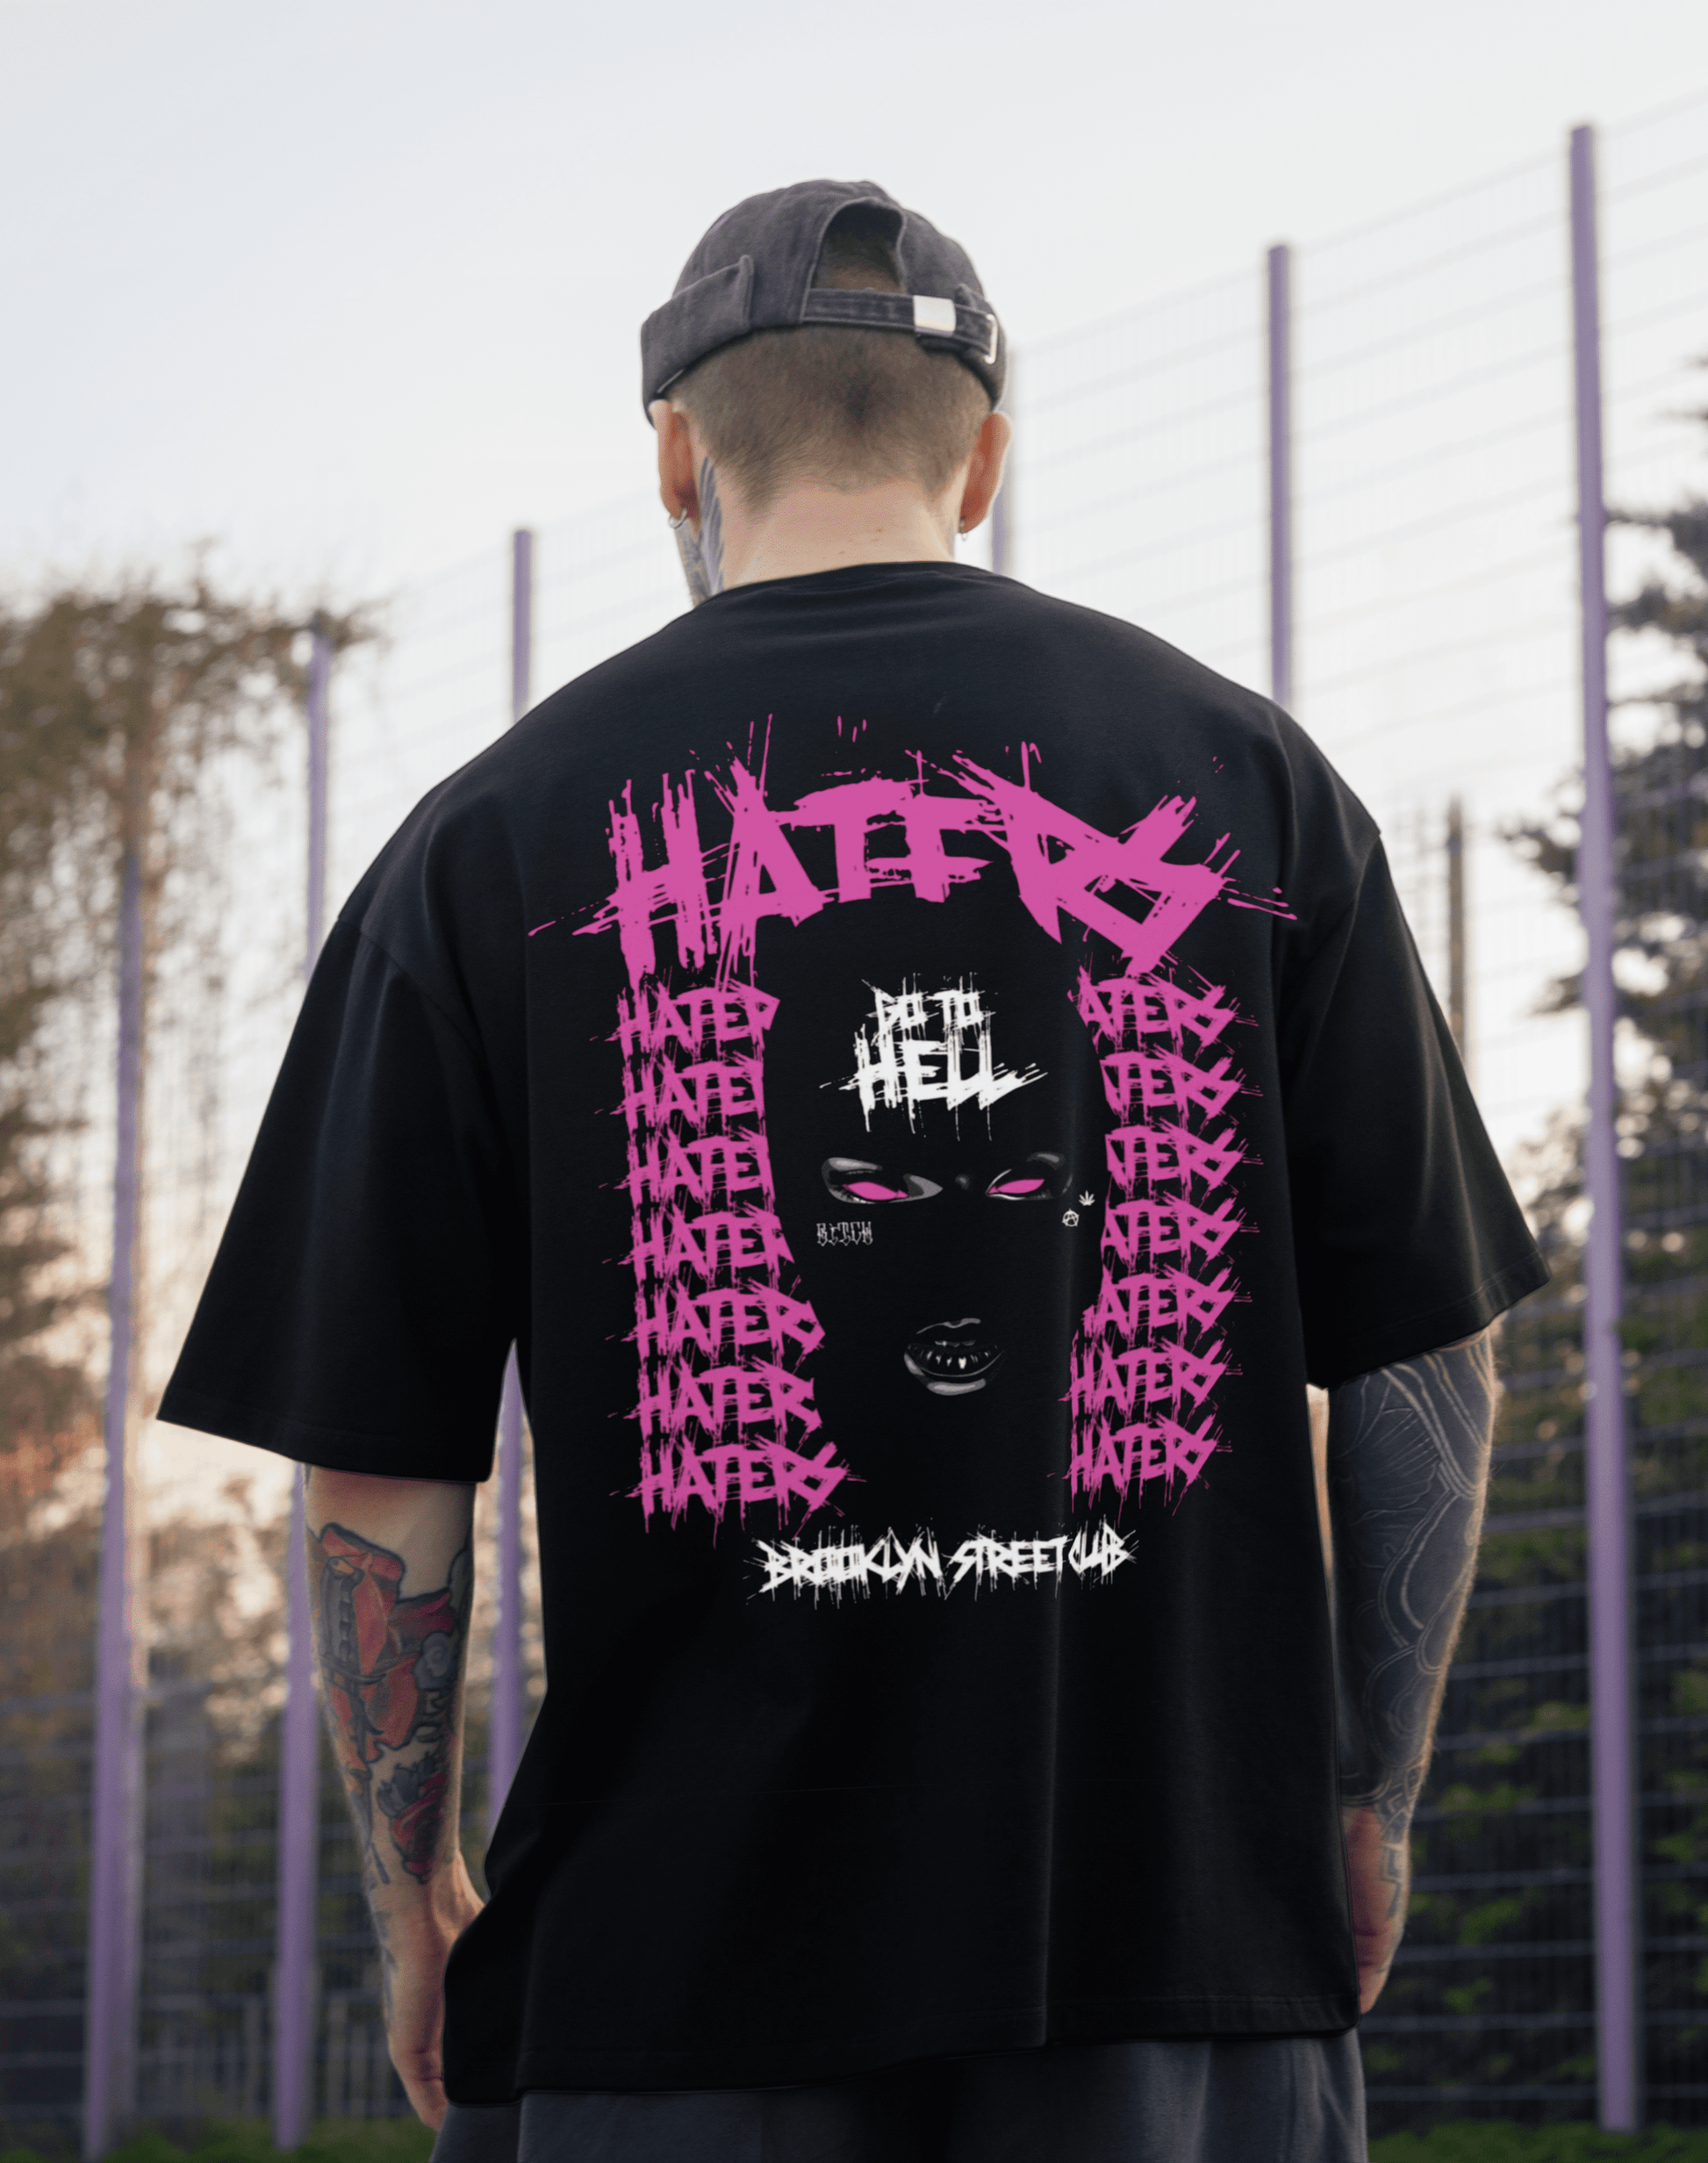 Haters Go to Hell - Black - Gym Oversized T Shirt Strong Soul Shirts & Tops